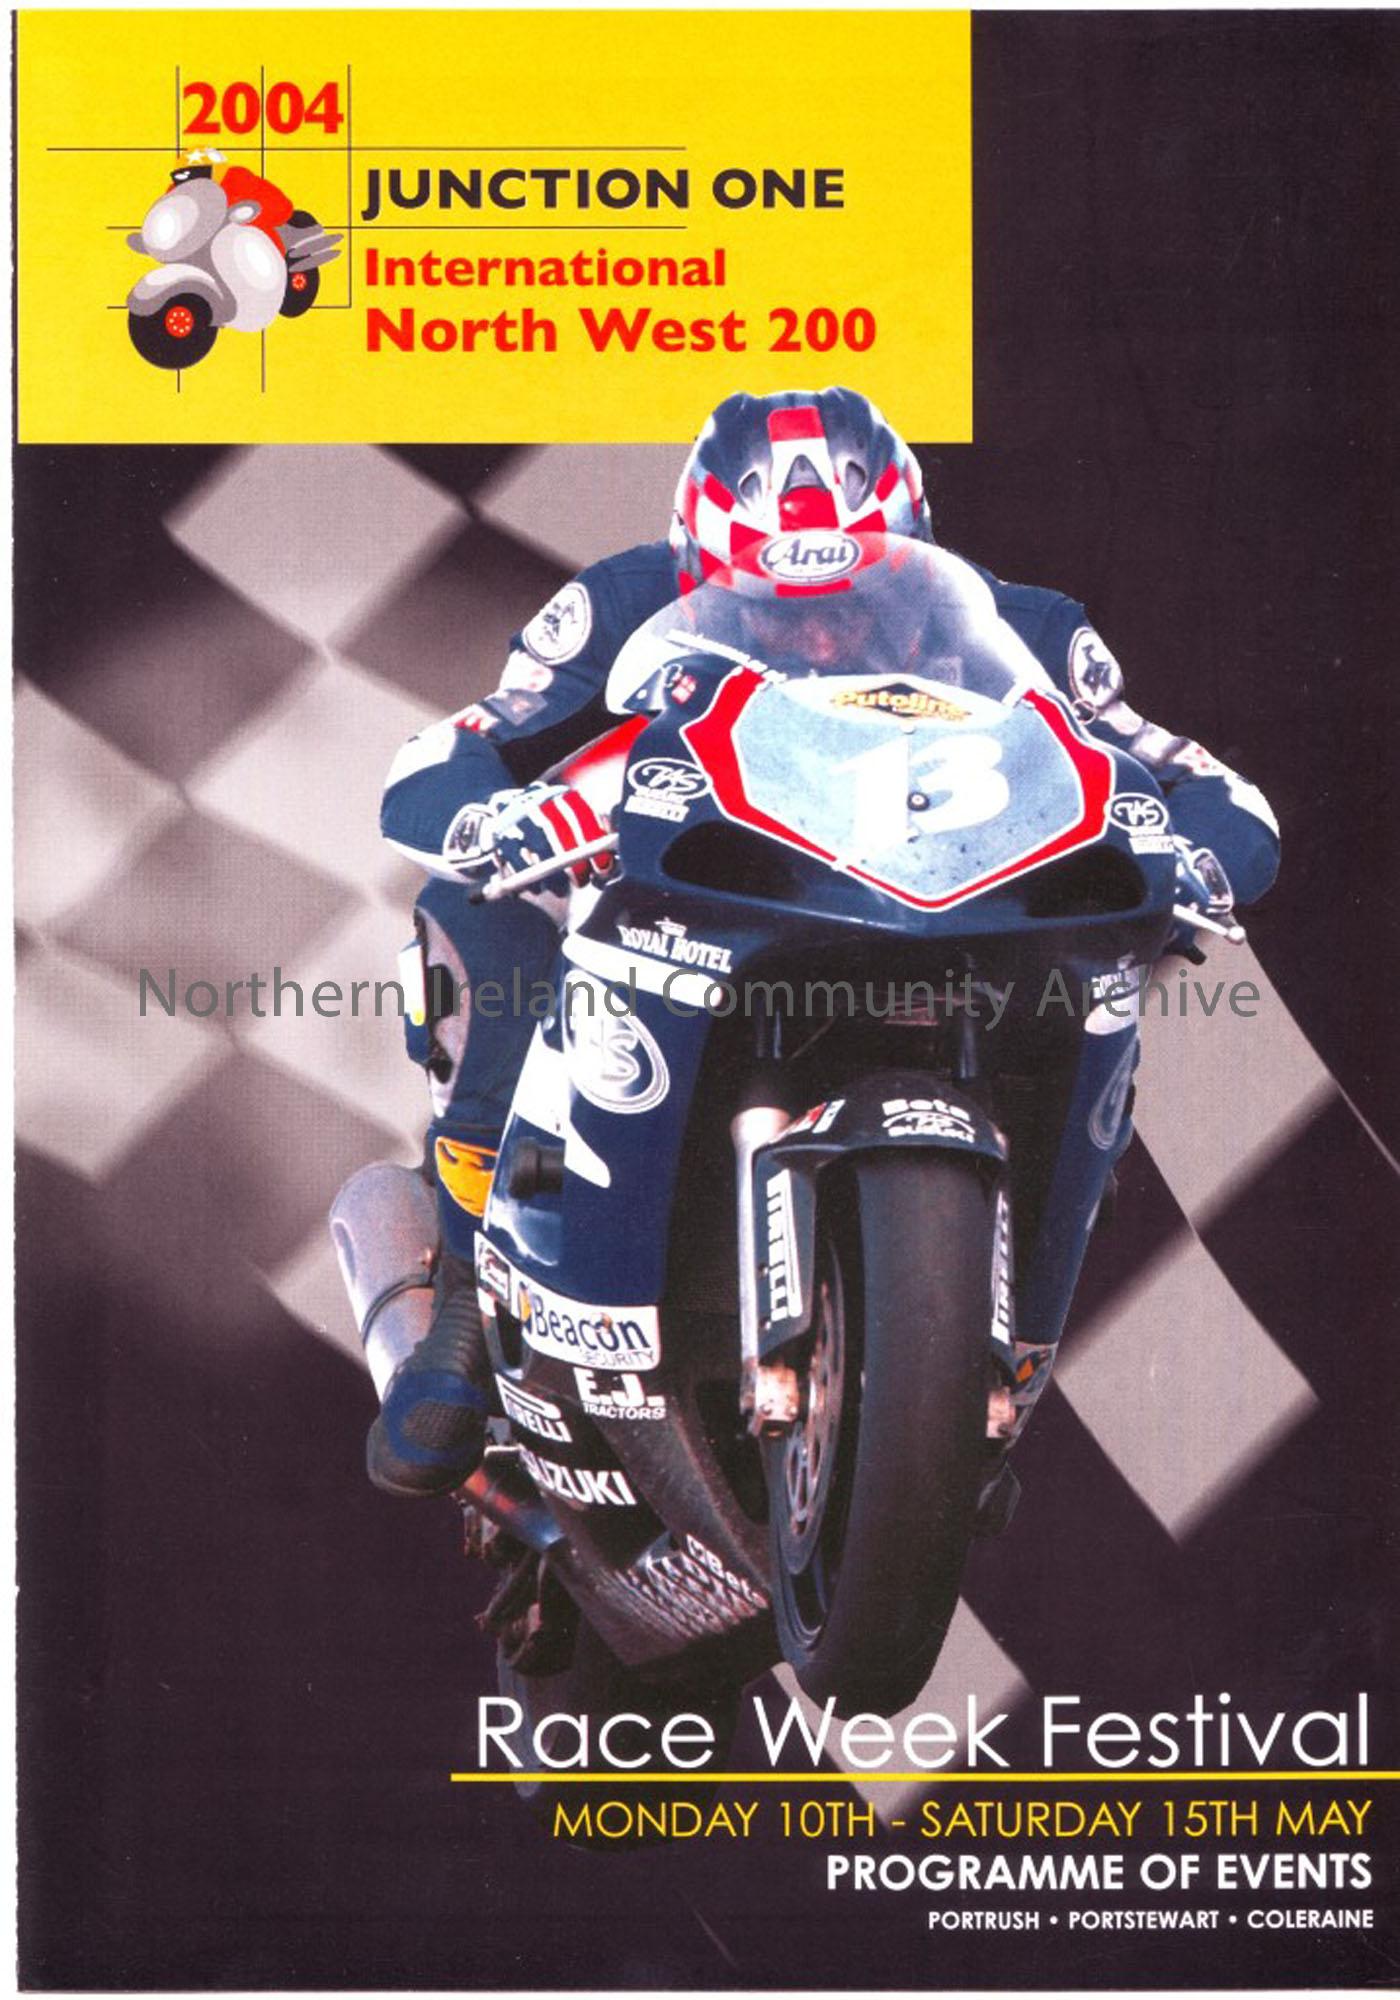 2004 Junction One International North West 200 Race Week Festival leaflet with programme of events. Monday 10th- Saturday 15th May.